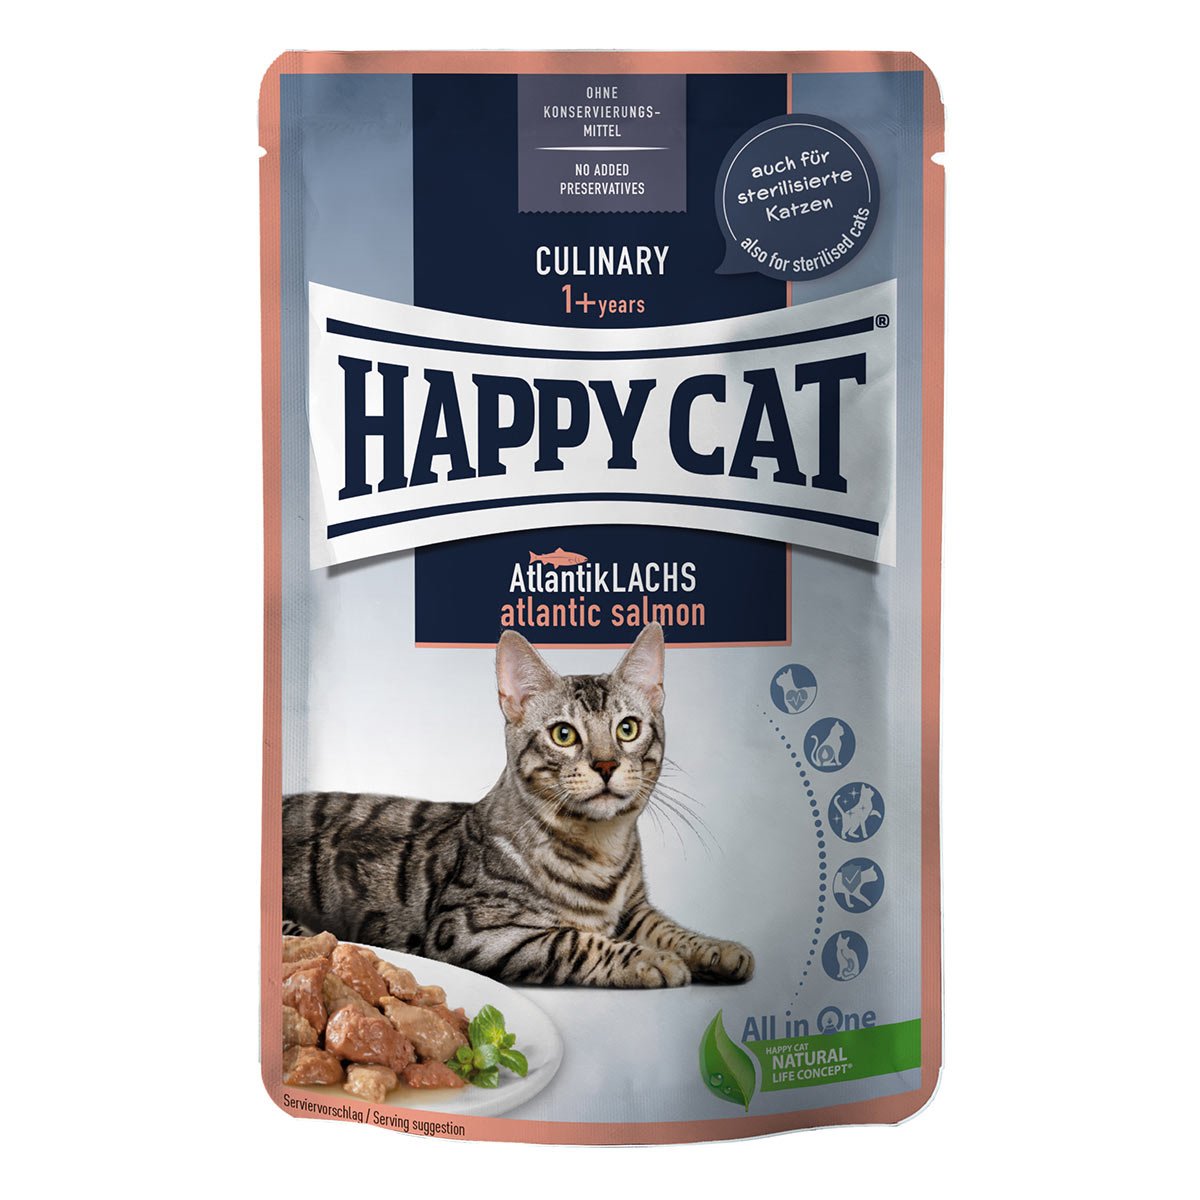 Happy Cat Tray Culinary Meat in Sauce Atlantik Lachs 12x85g